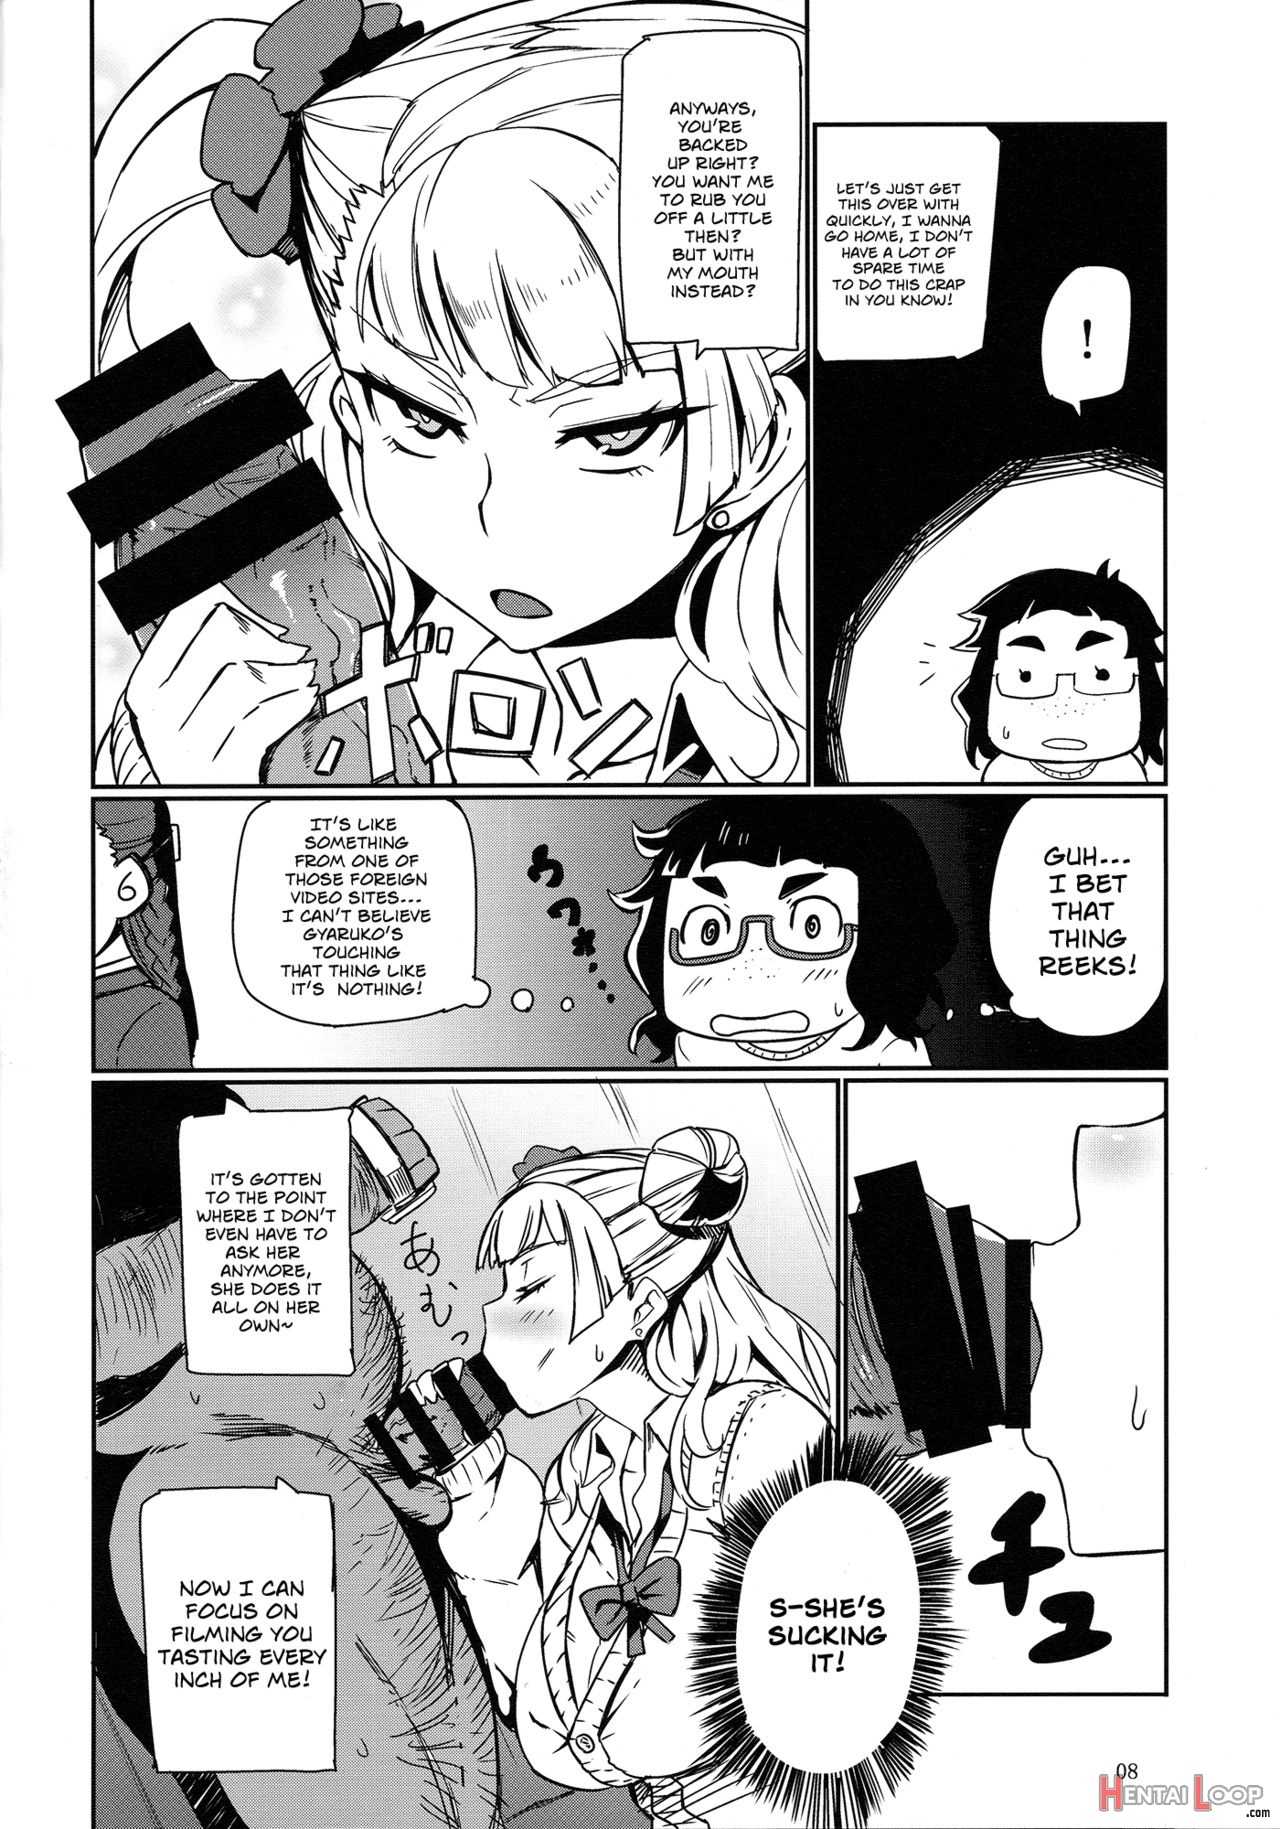 Galko Ah! page 7